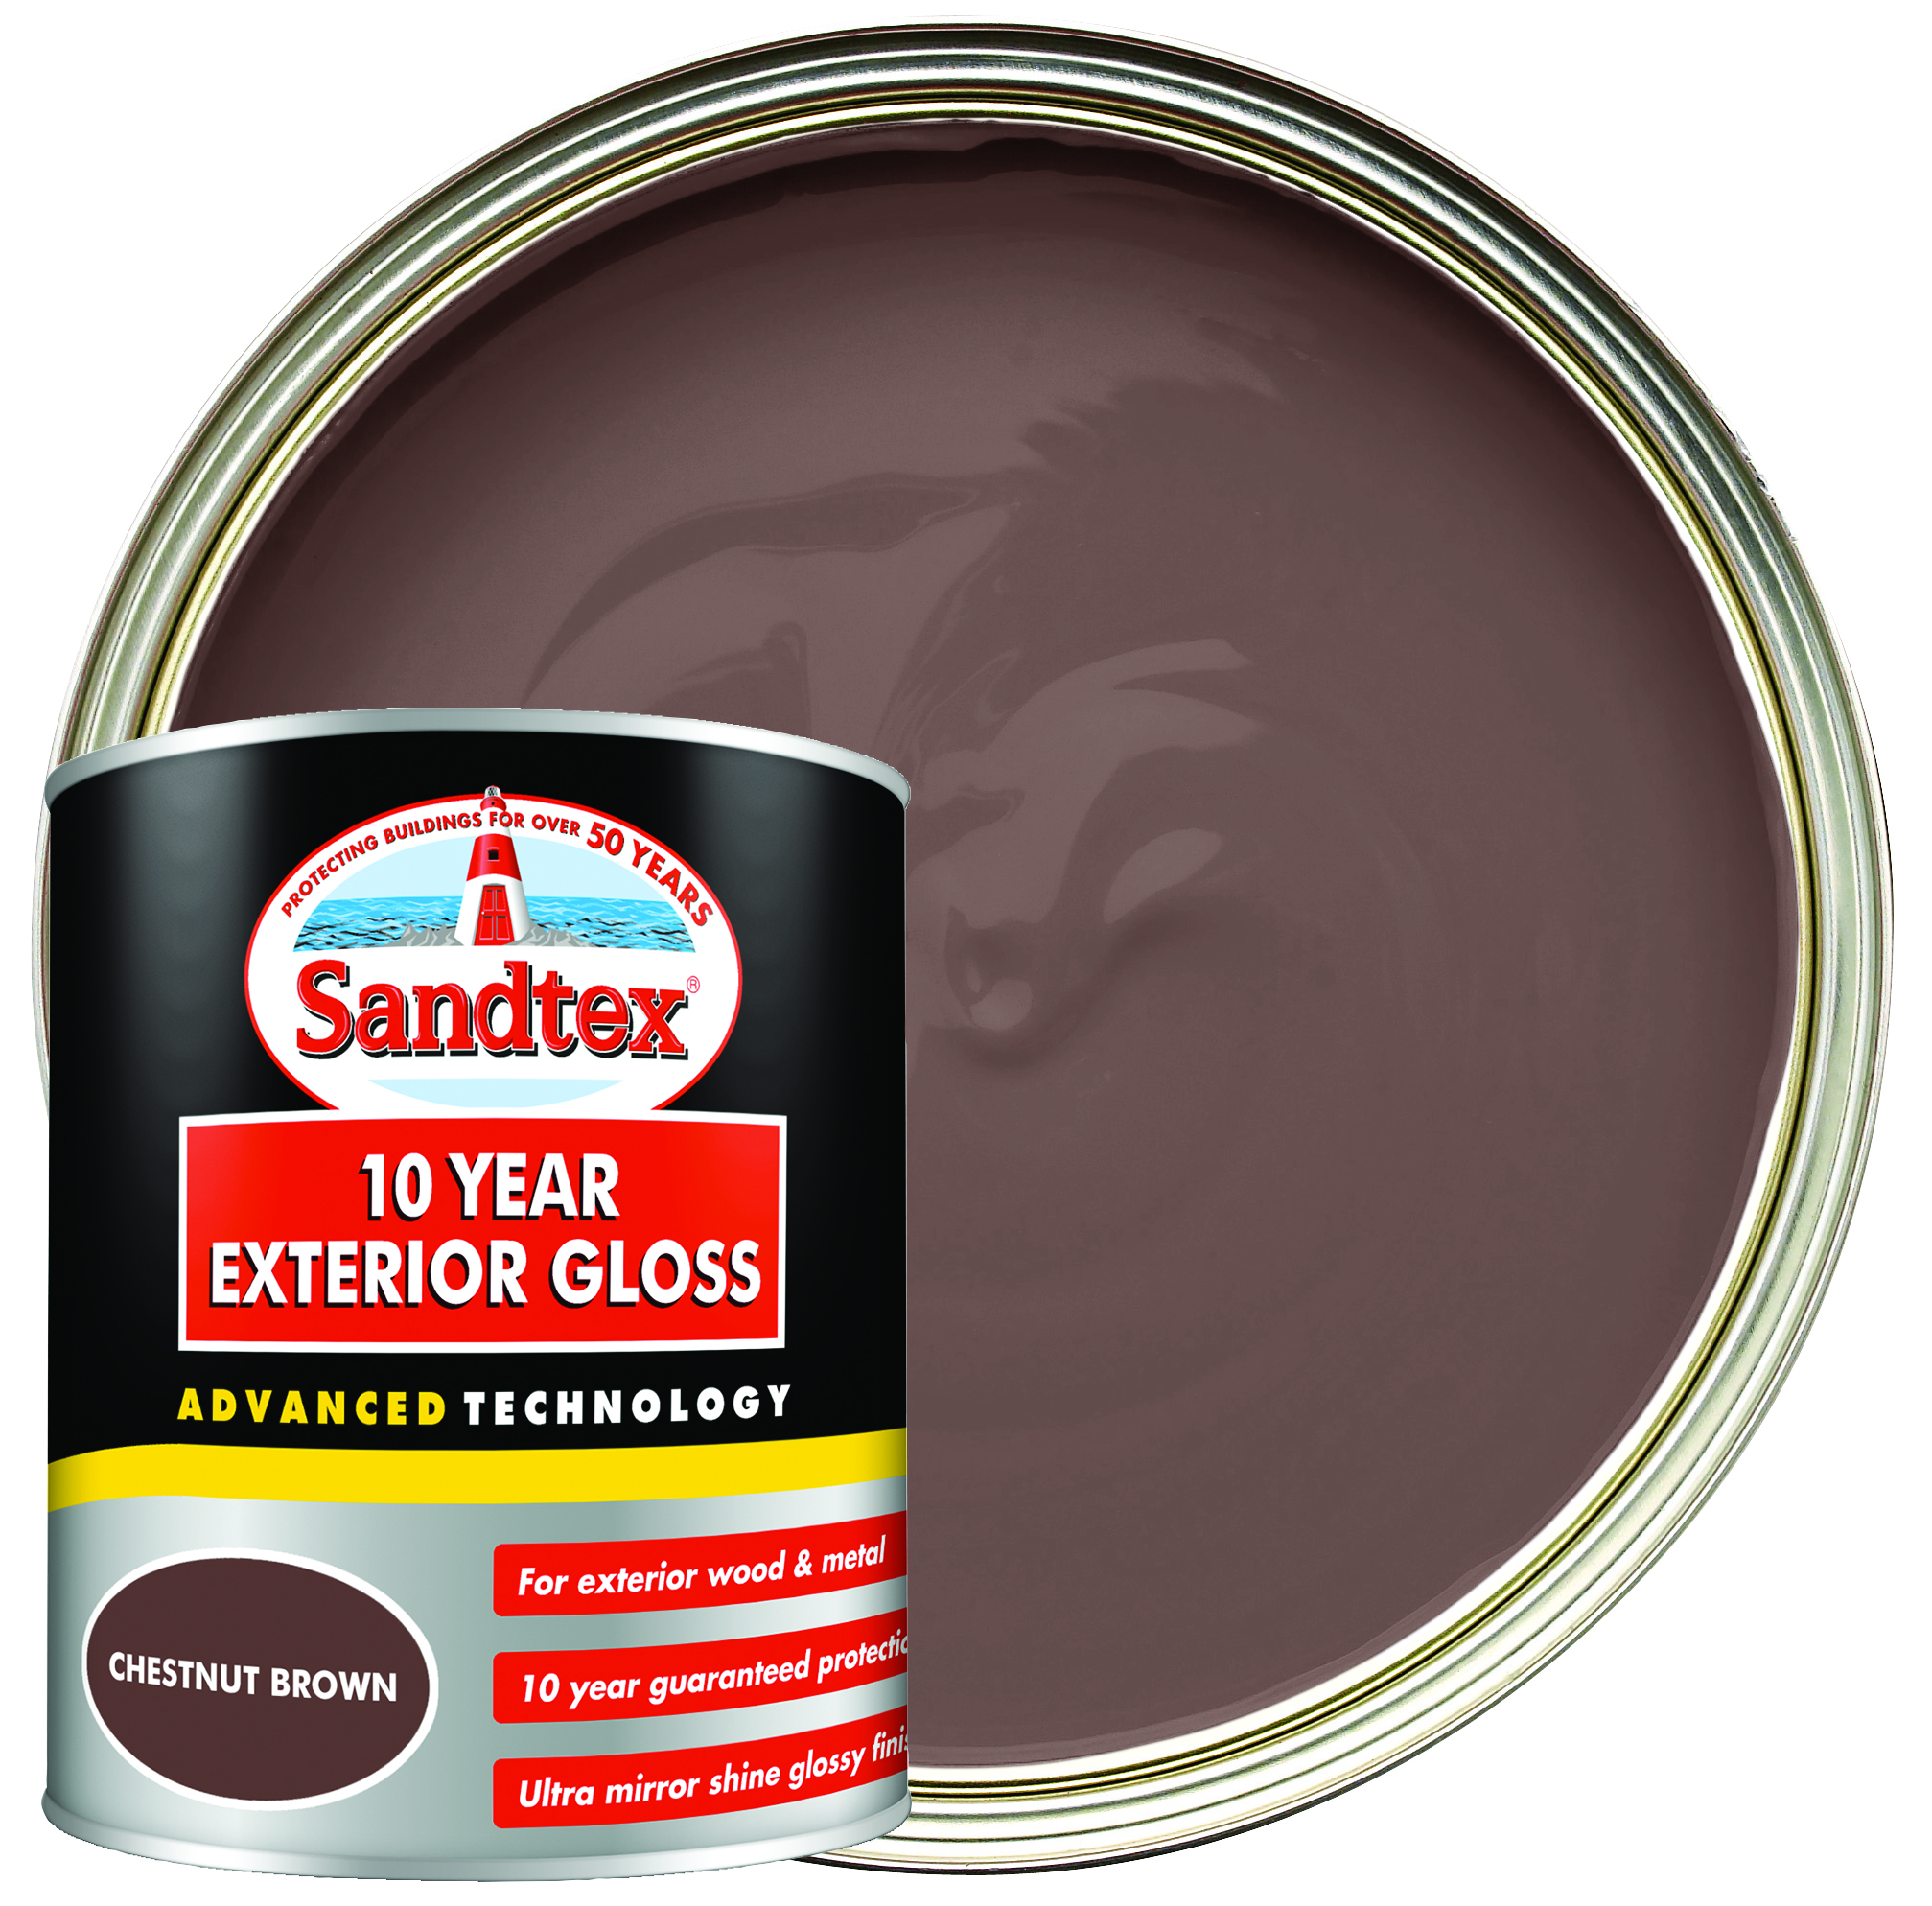 Image of Sandtex 10 Year Exterior Gloss Paint - Chestnut Brown - 750ml